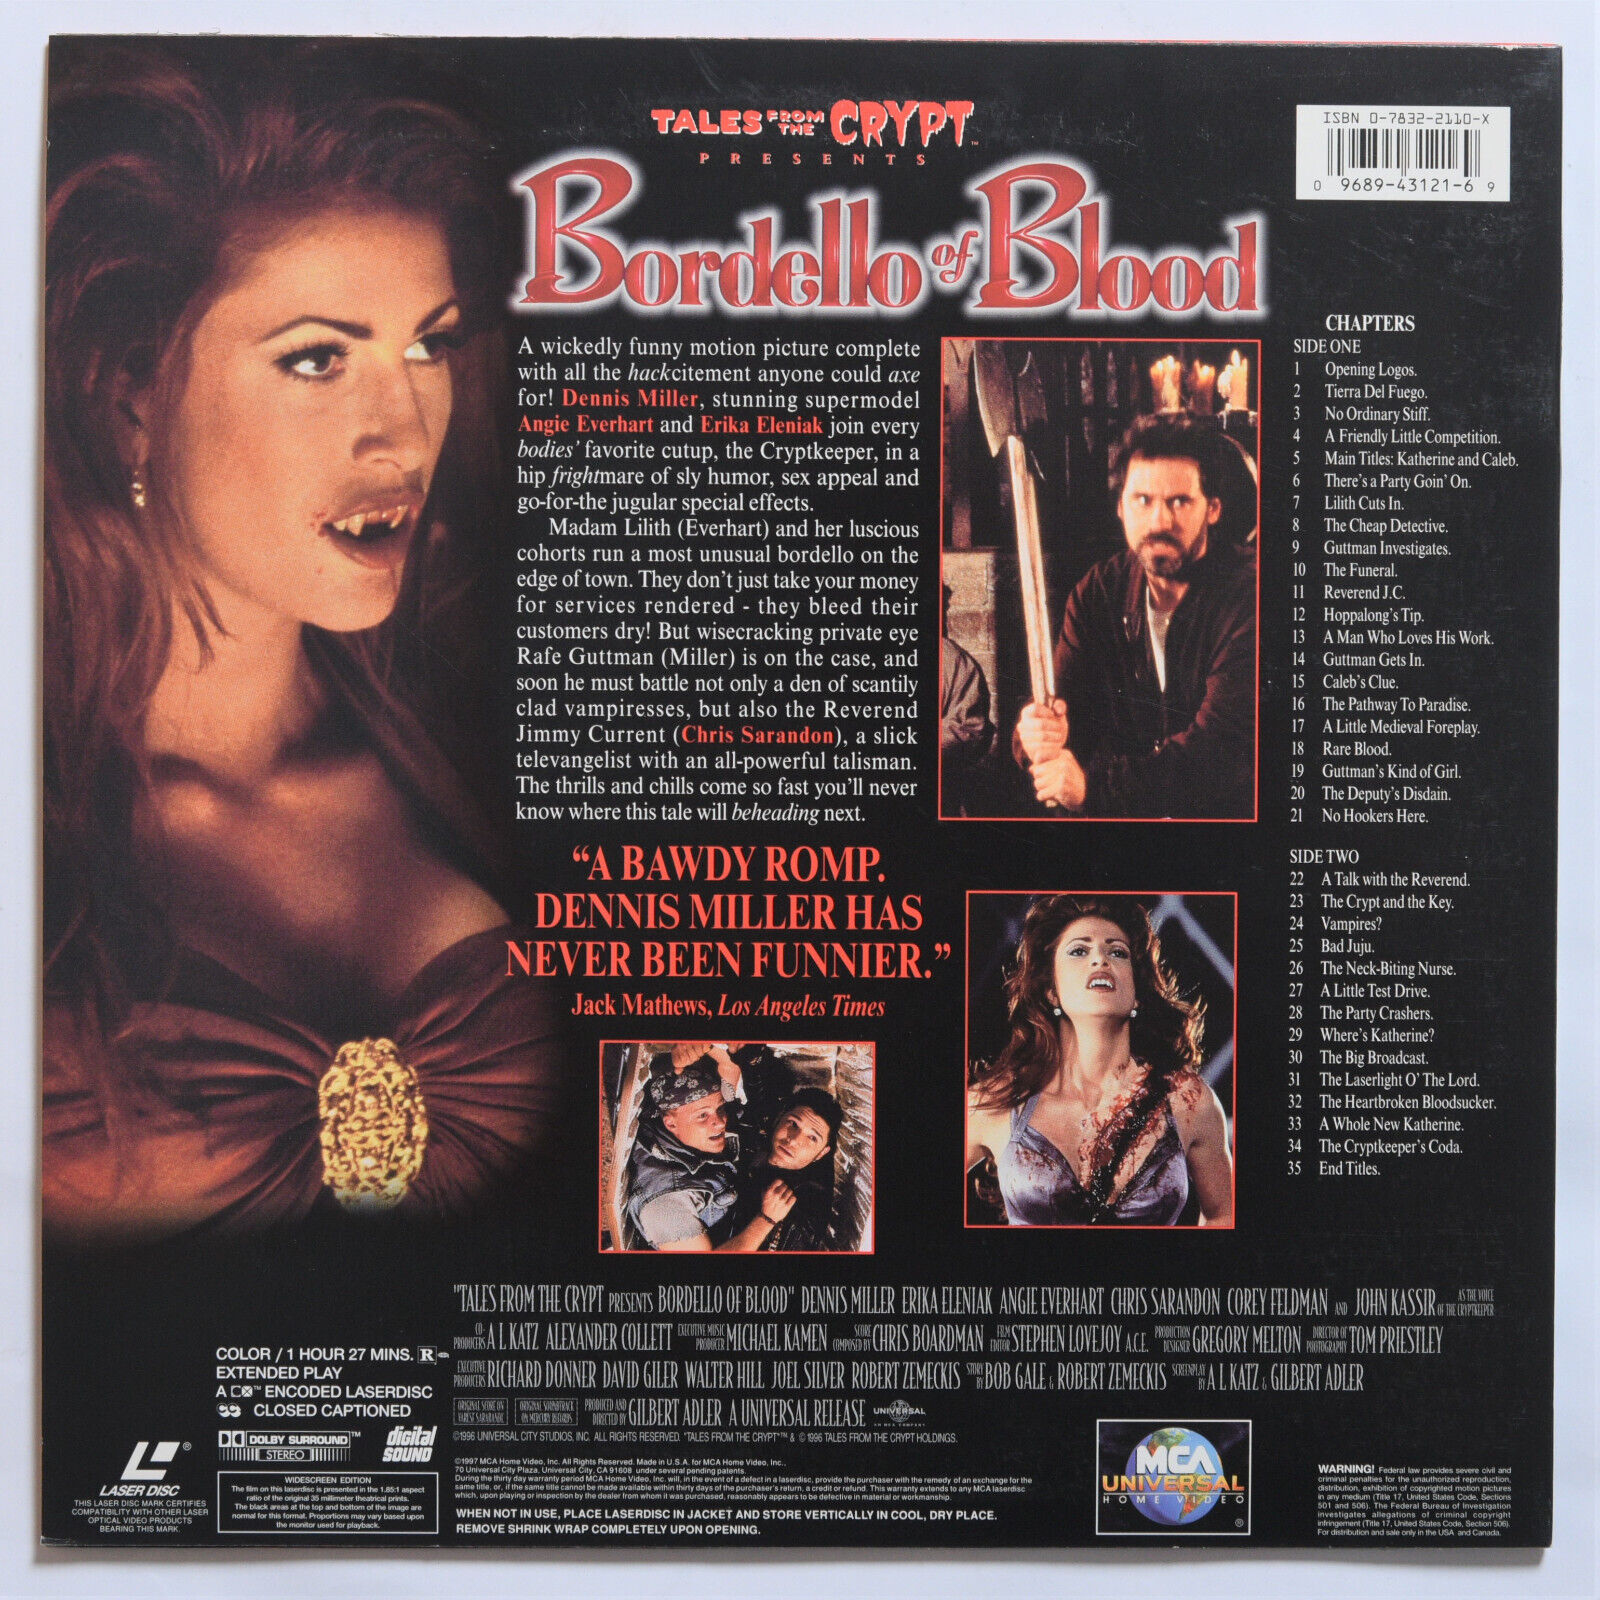 Tales from the Crypt presents Bordello of Blood